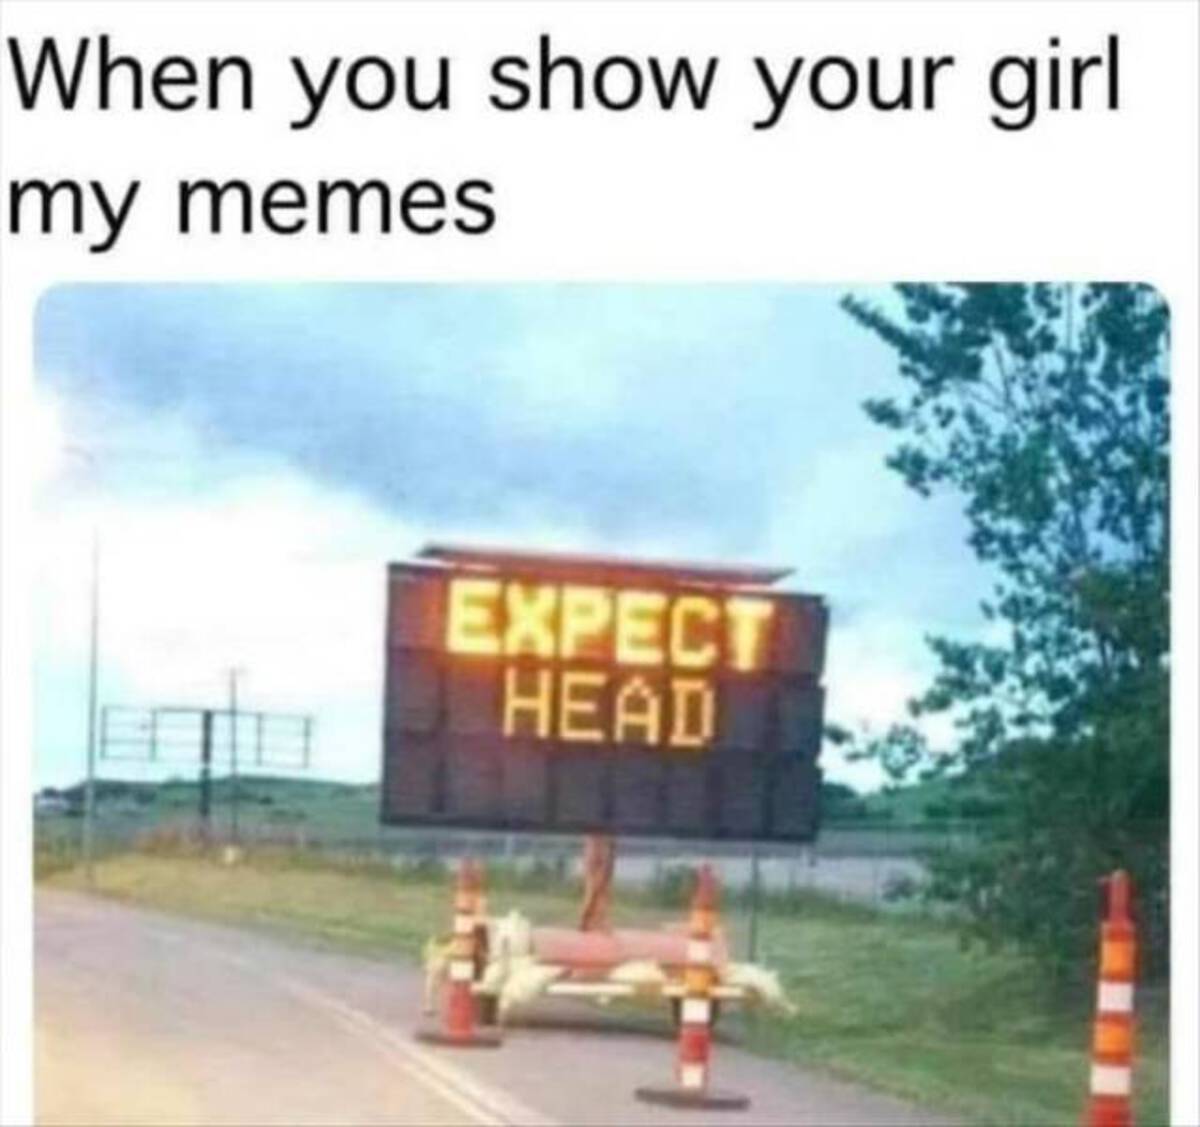 highway - When you show your girl my memes Expect Head